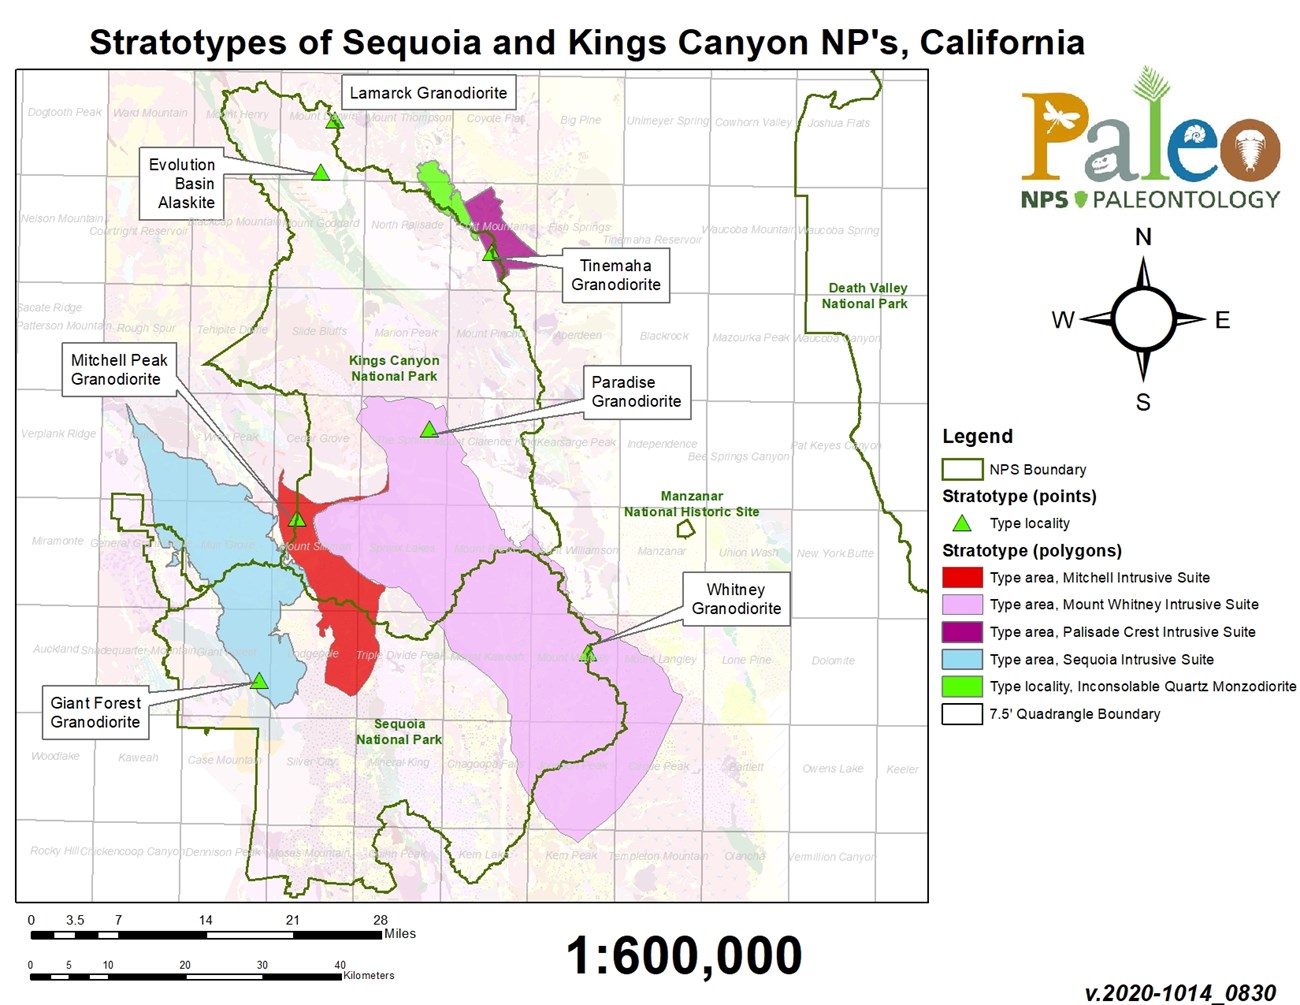 Map of Sequoia and Kings Canyon showing the locations of five type areas and one type locality.